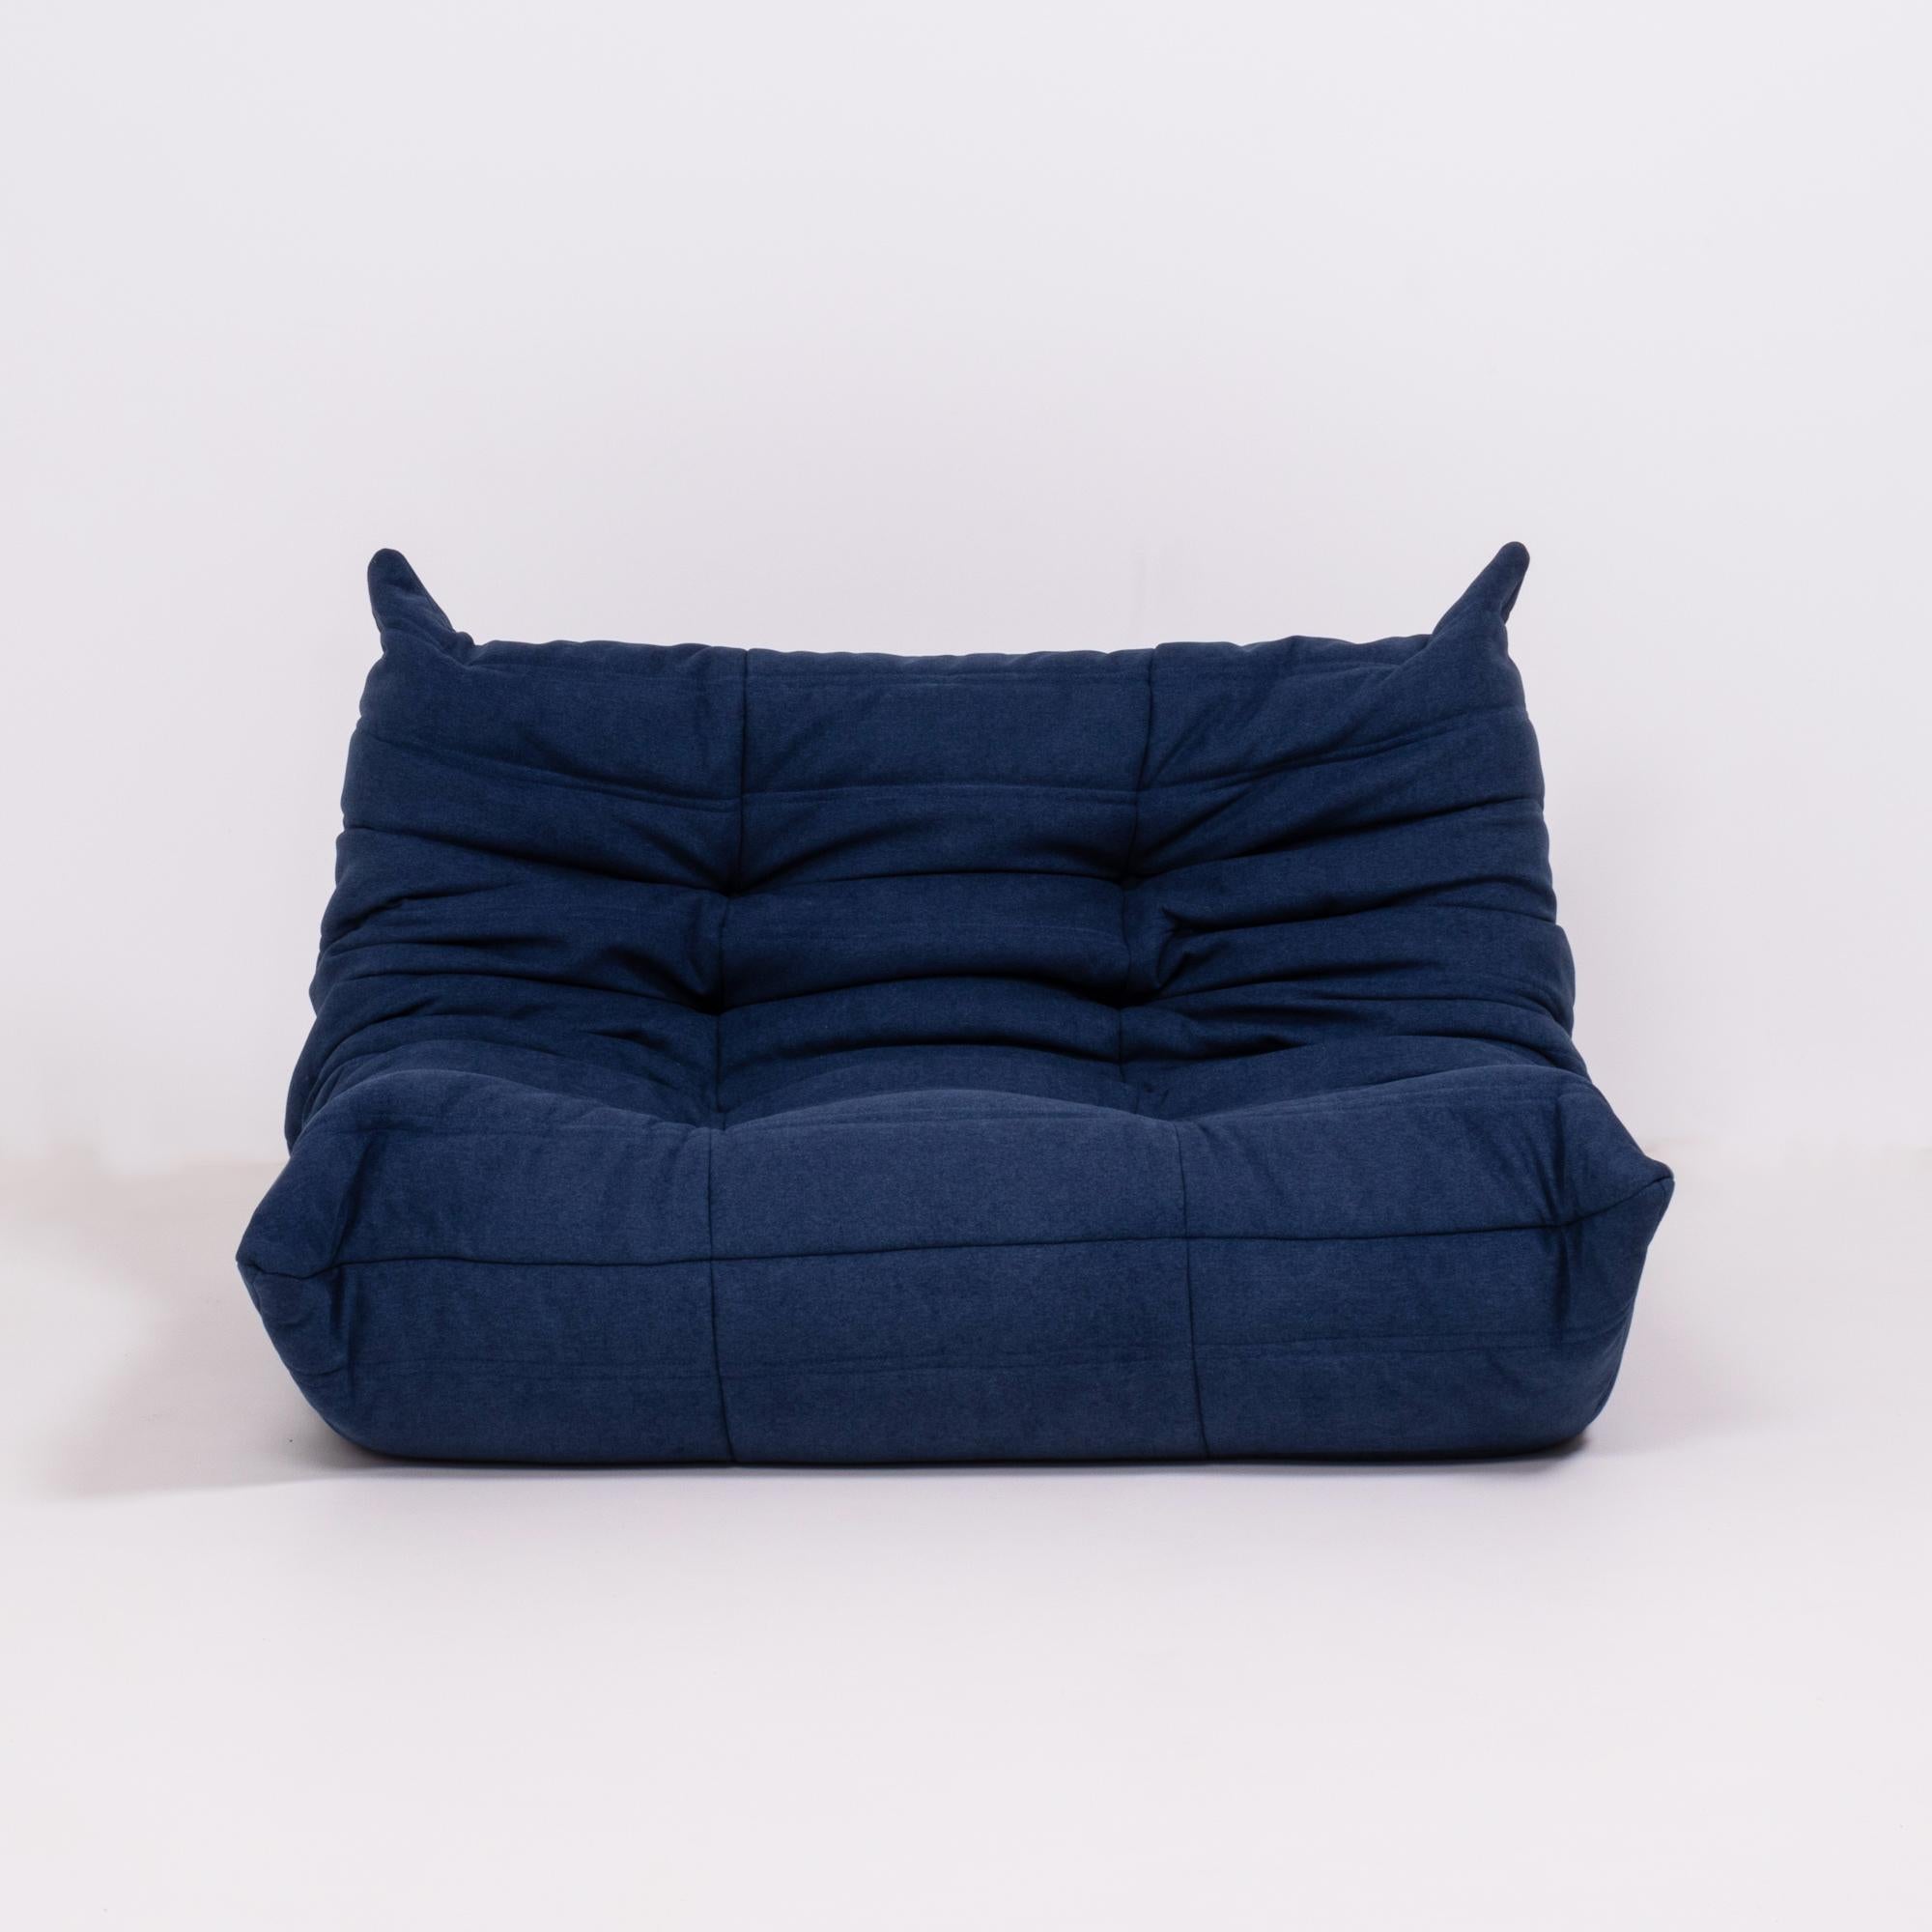 Late 20th Century Togo Blue Modular Sofa and Footstool by Michel Ducaroy for Ligne Roset, Set of 5